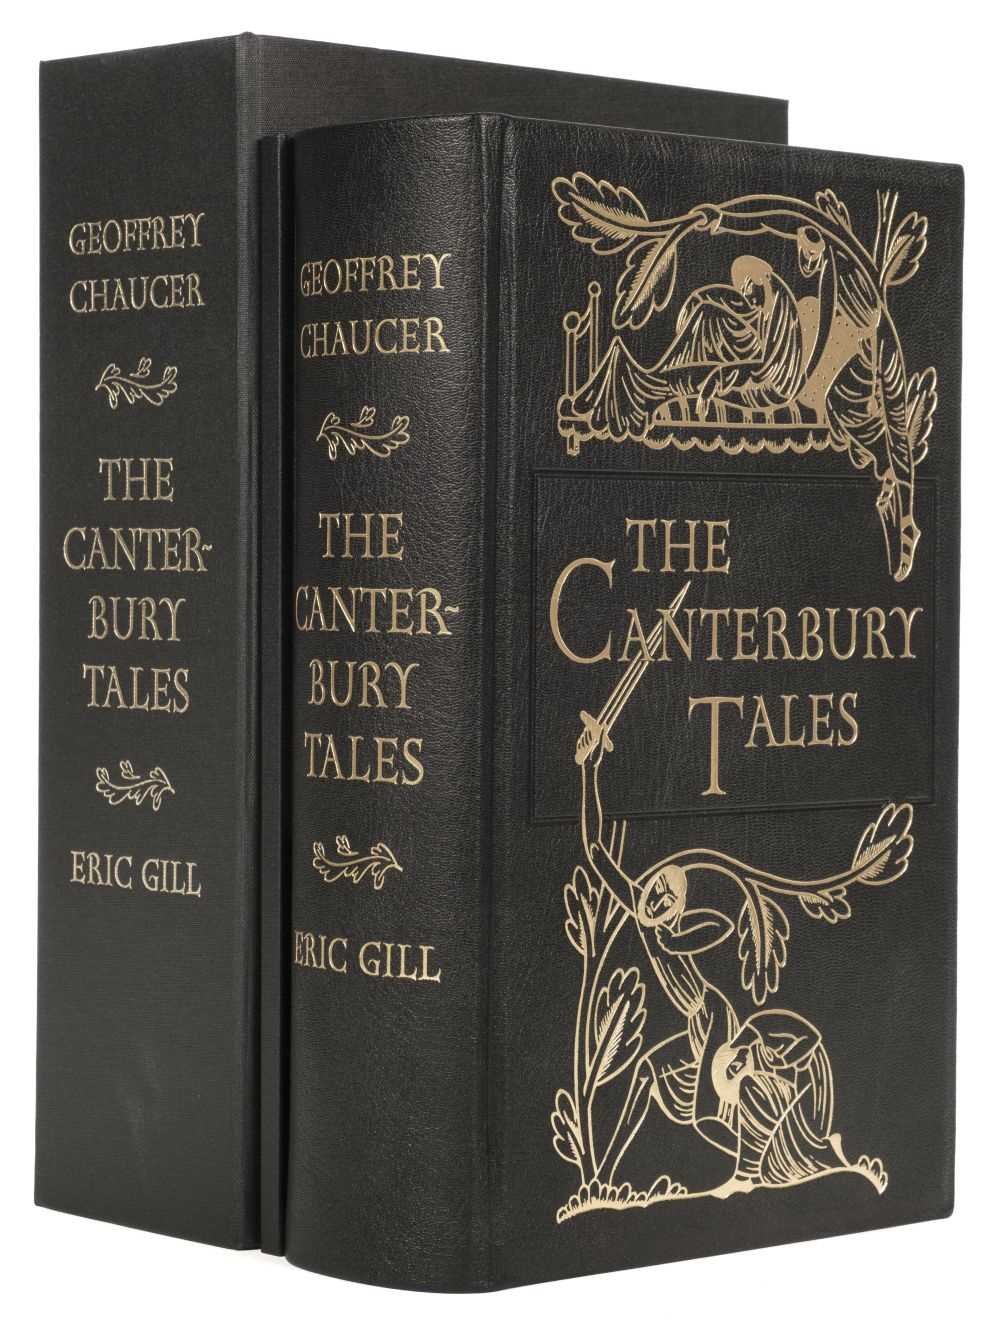 Lot 571 - Folio Society. The Canterbury Tales, by Geoffrey Chaucer,  limited (facsimile) edition, 2010